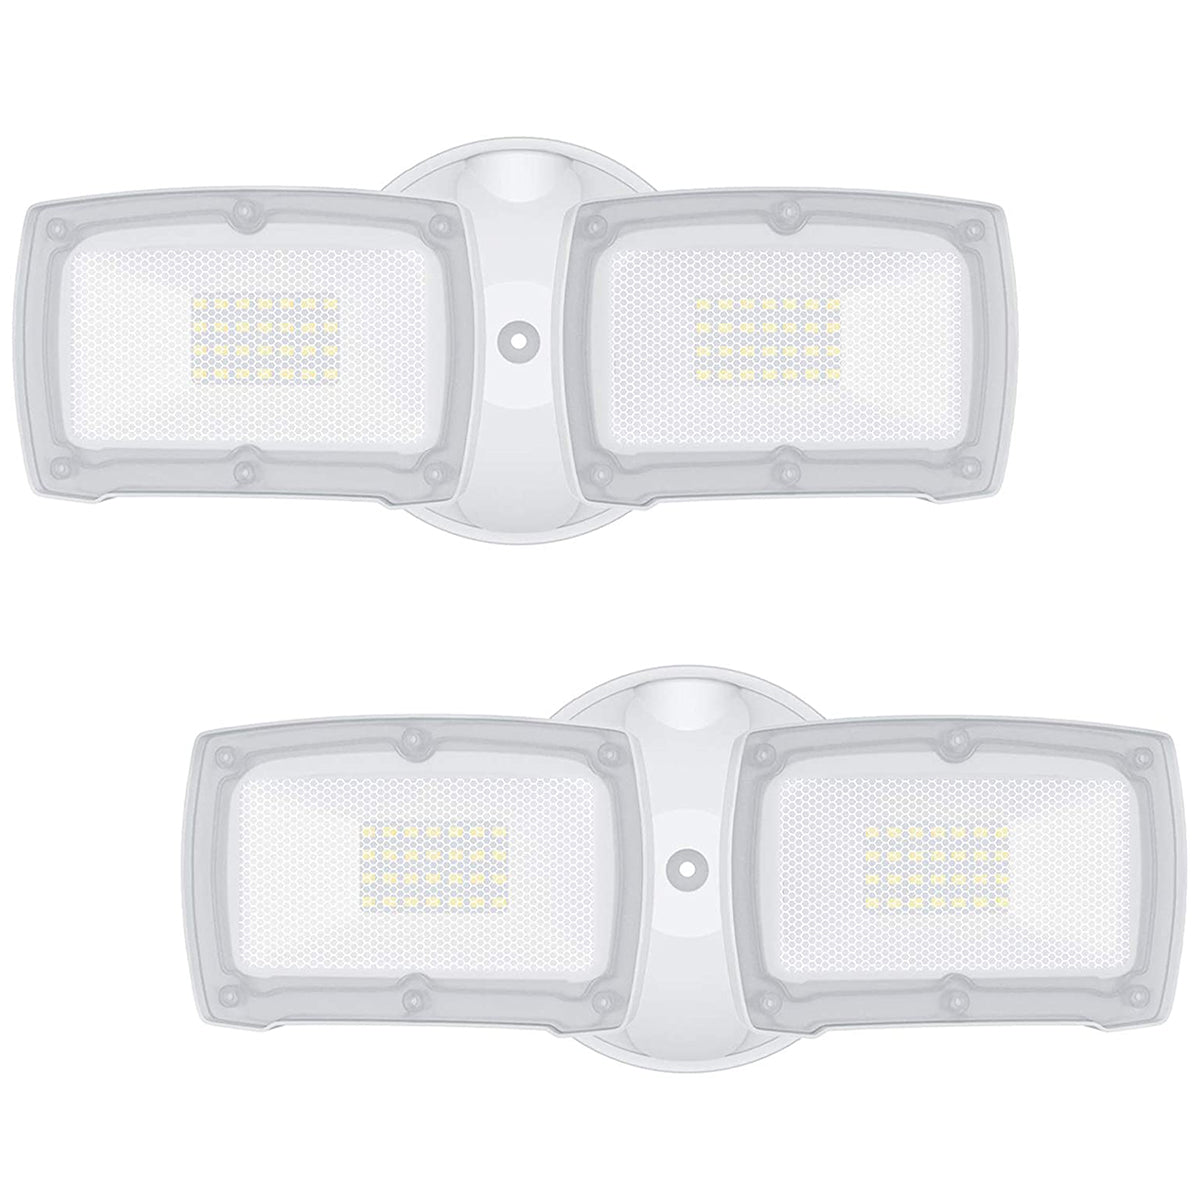 LED Flood Light 28W 3000lm Switch Controlled Adjustable-2pack